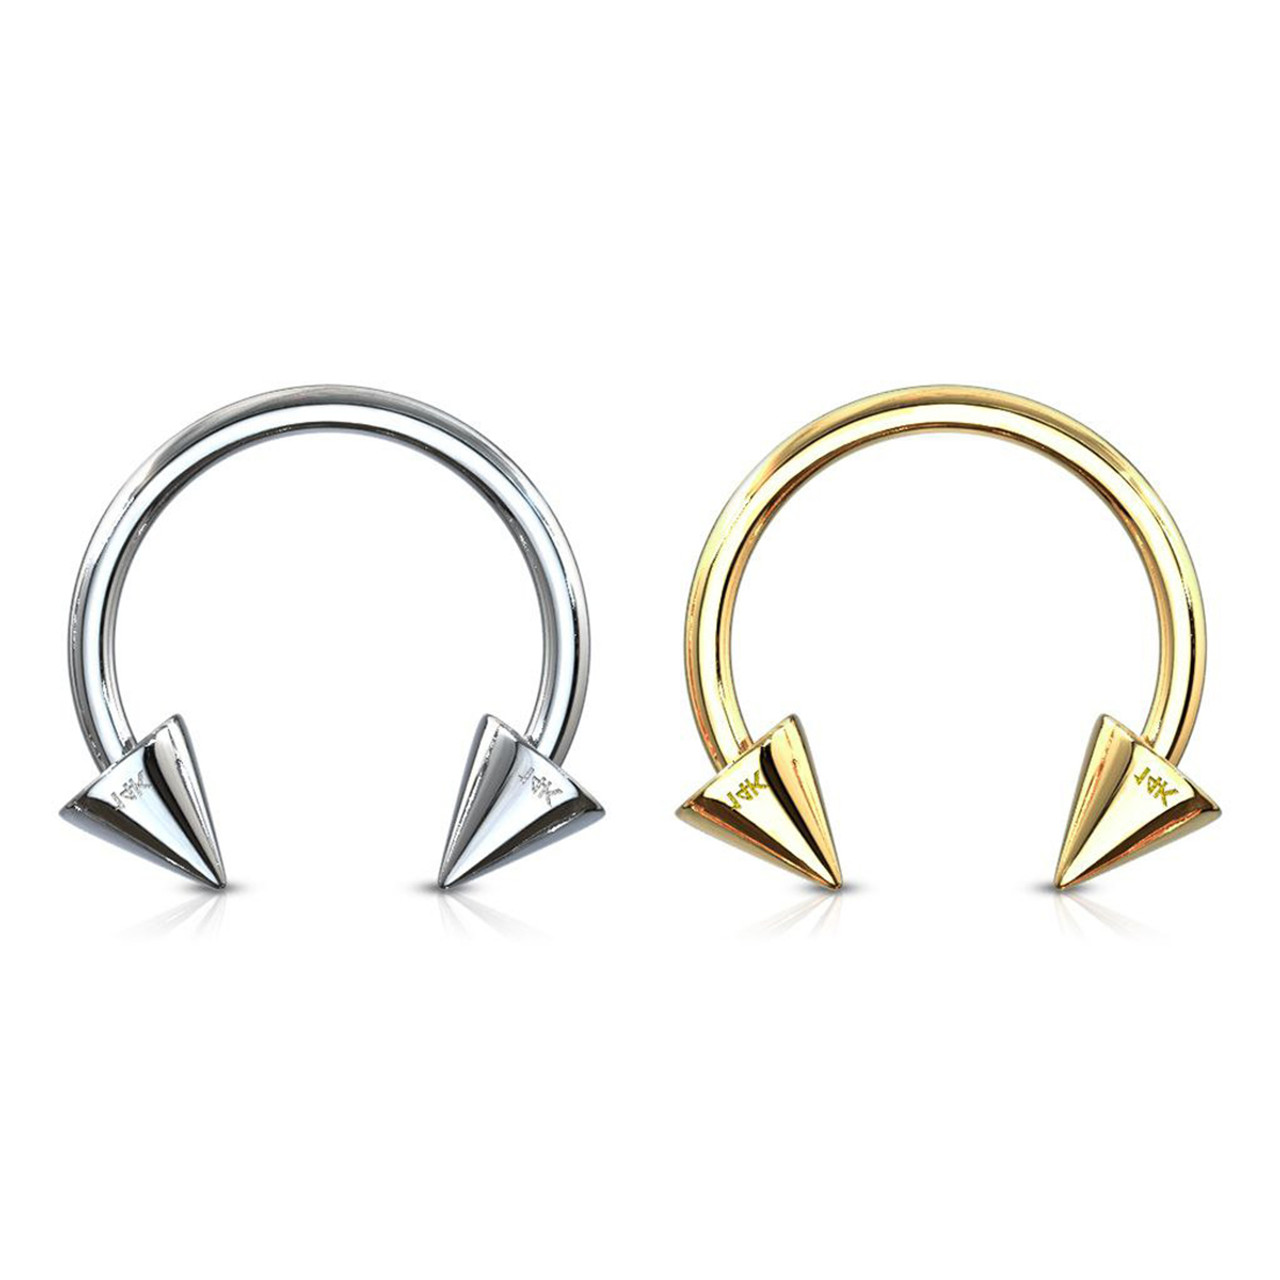 14G-16G 14K Solid Gold Horseshoe Circular Barbell Spike End Nose Ring Hoops Septum Piercing Jewelry 5/16